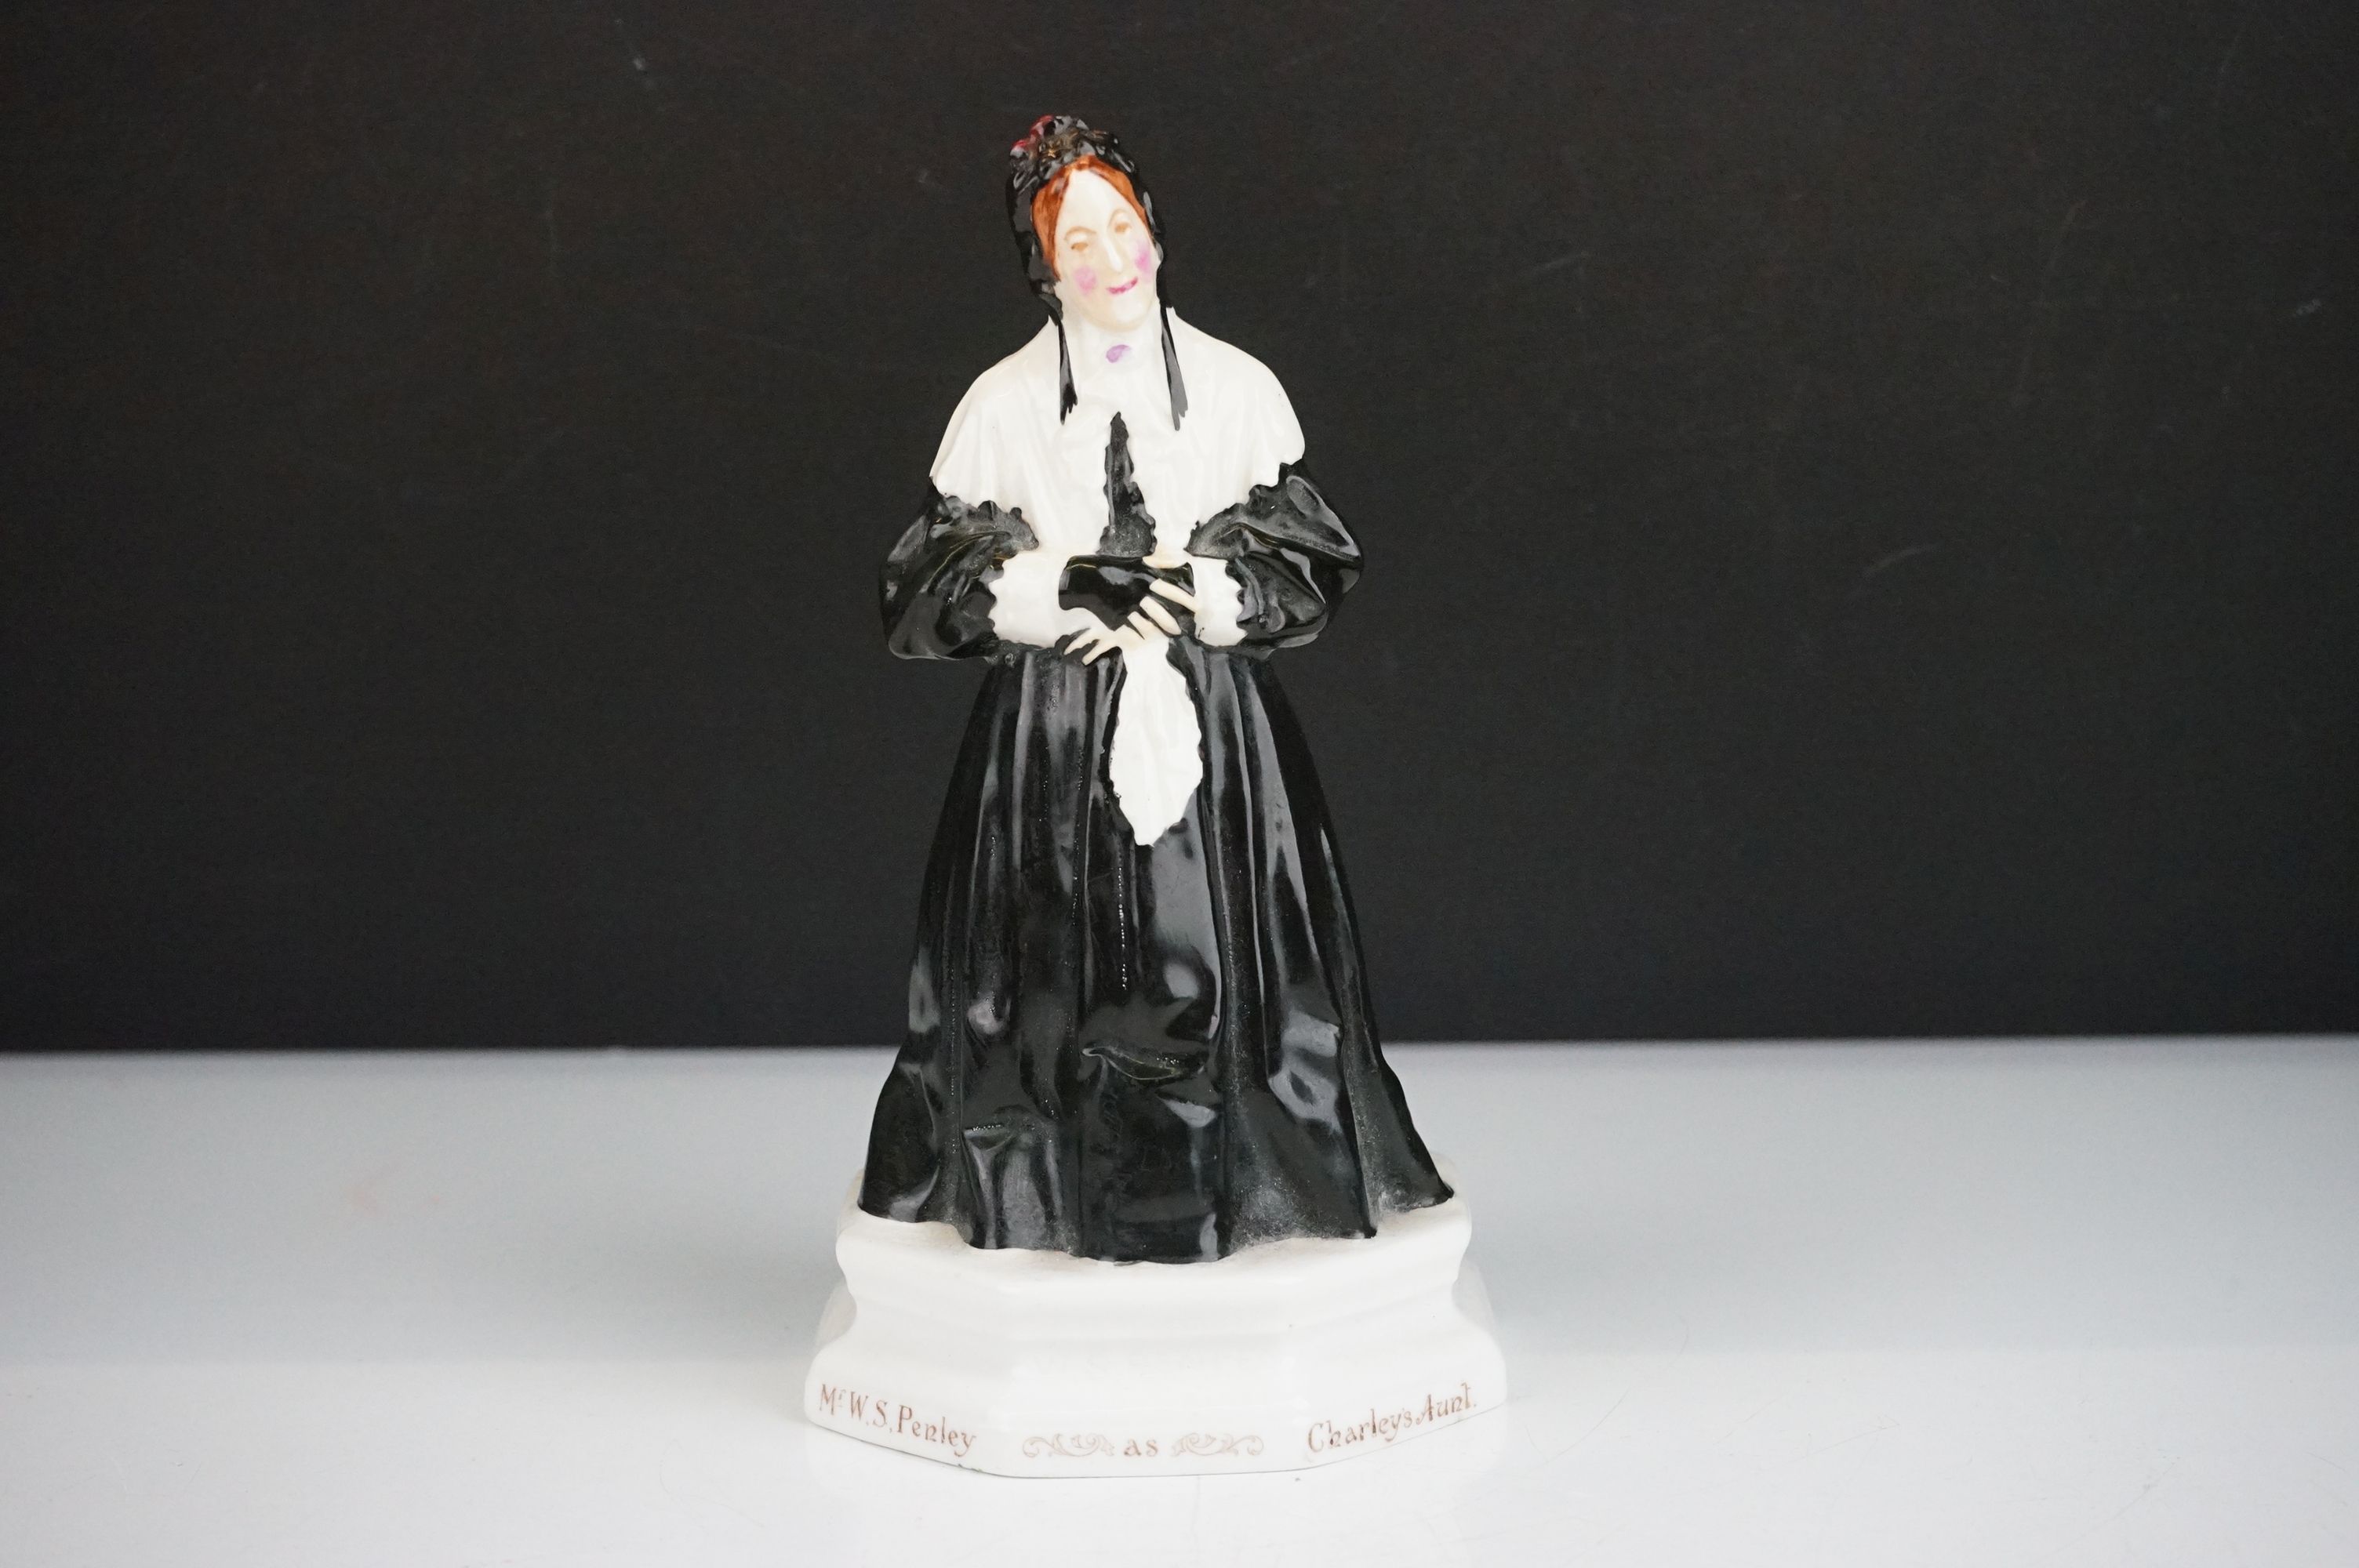 Early Royal Doulton ceramic figurine ' Mr W S Penley as Charleys Aunt ' in the form of a Victorian